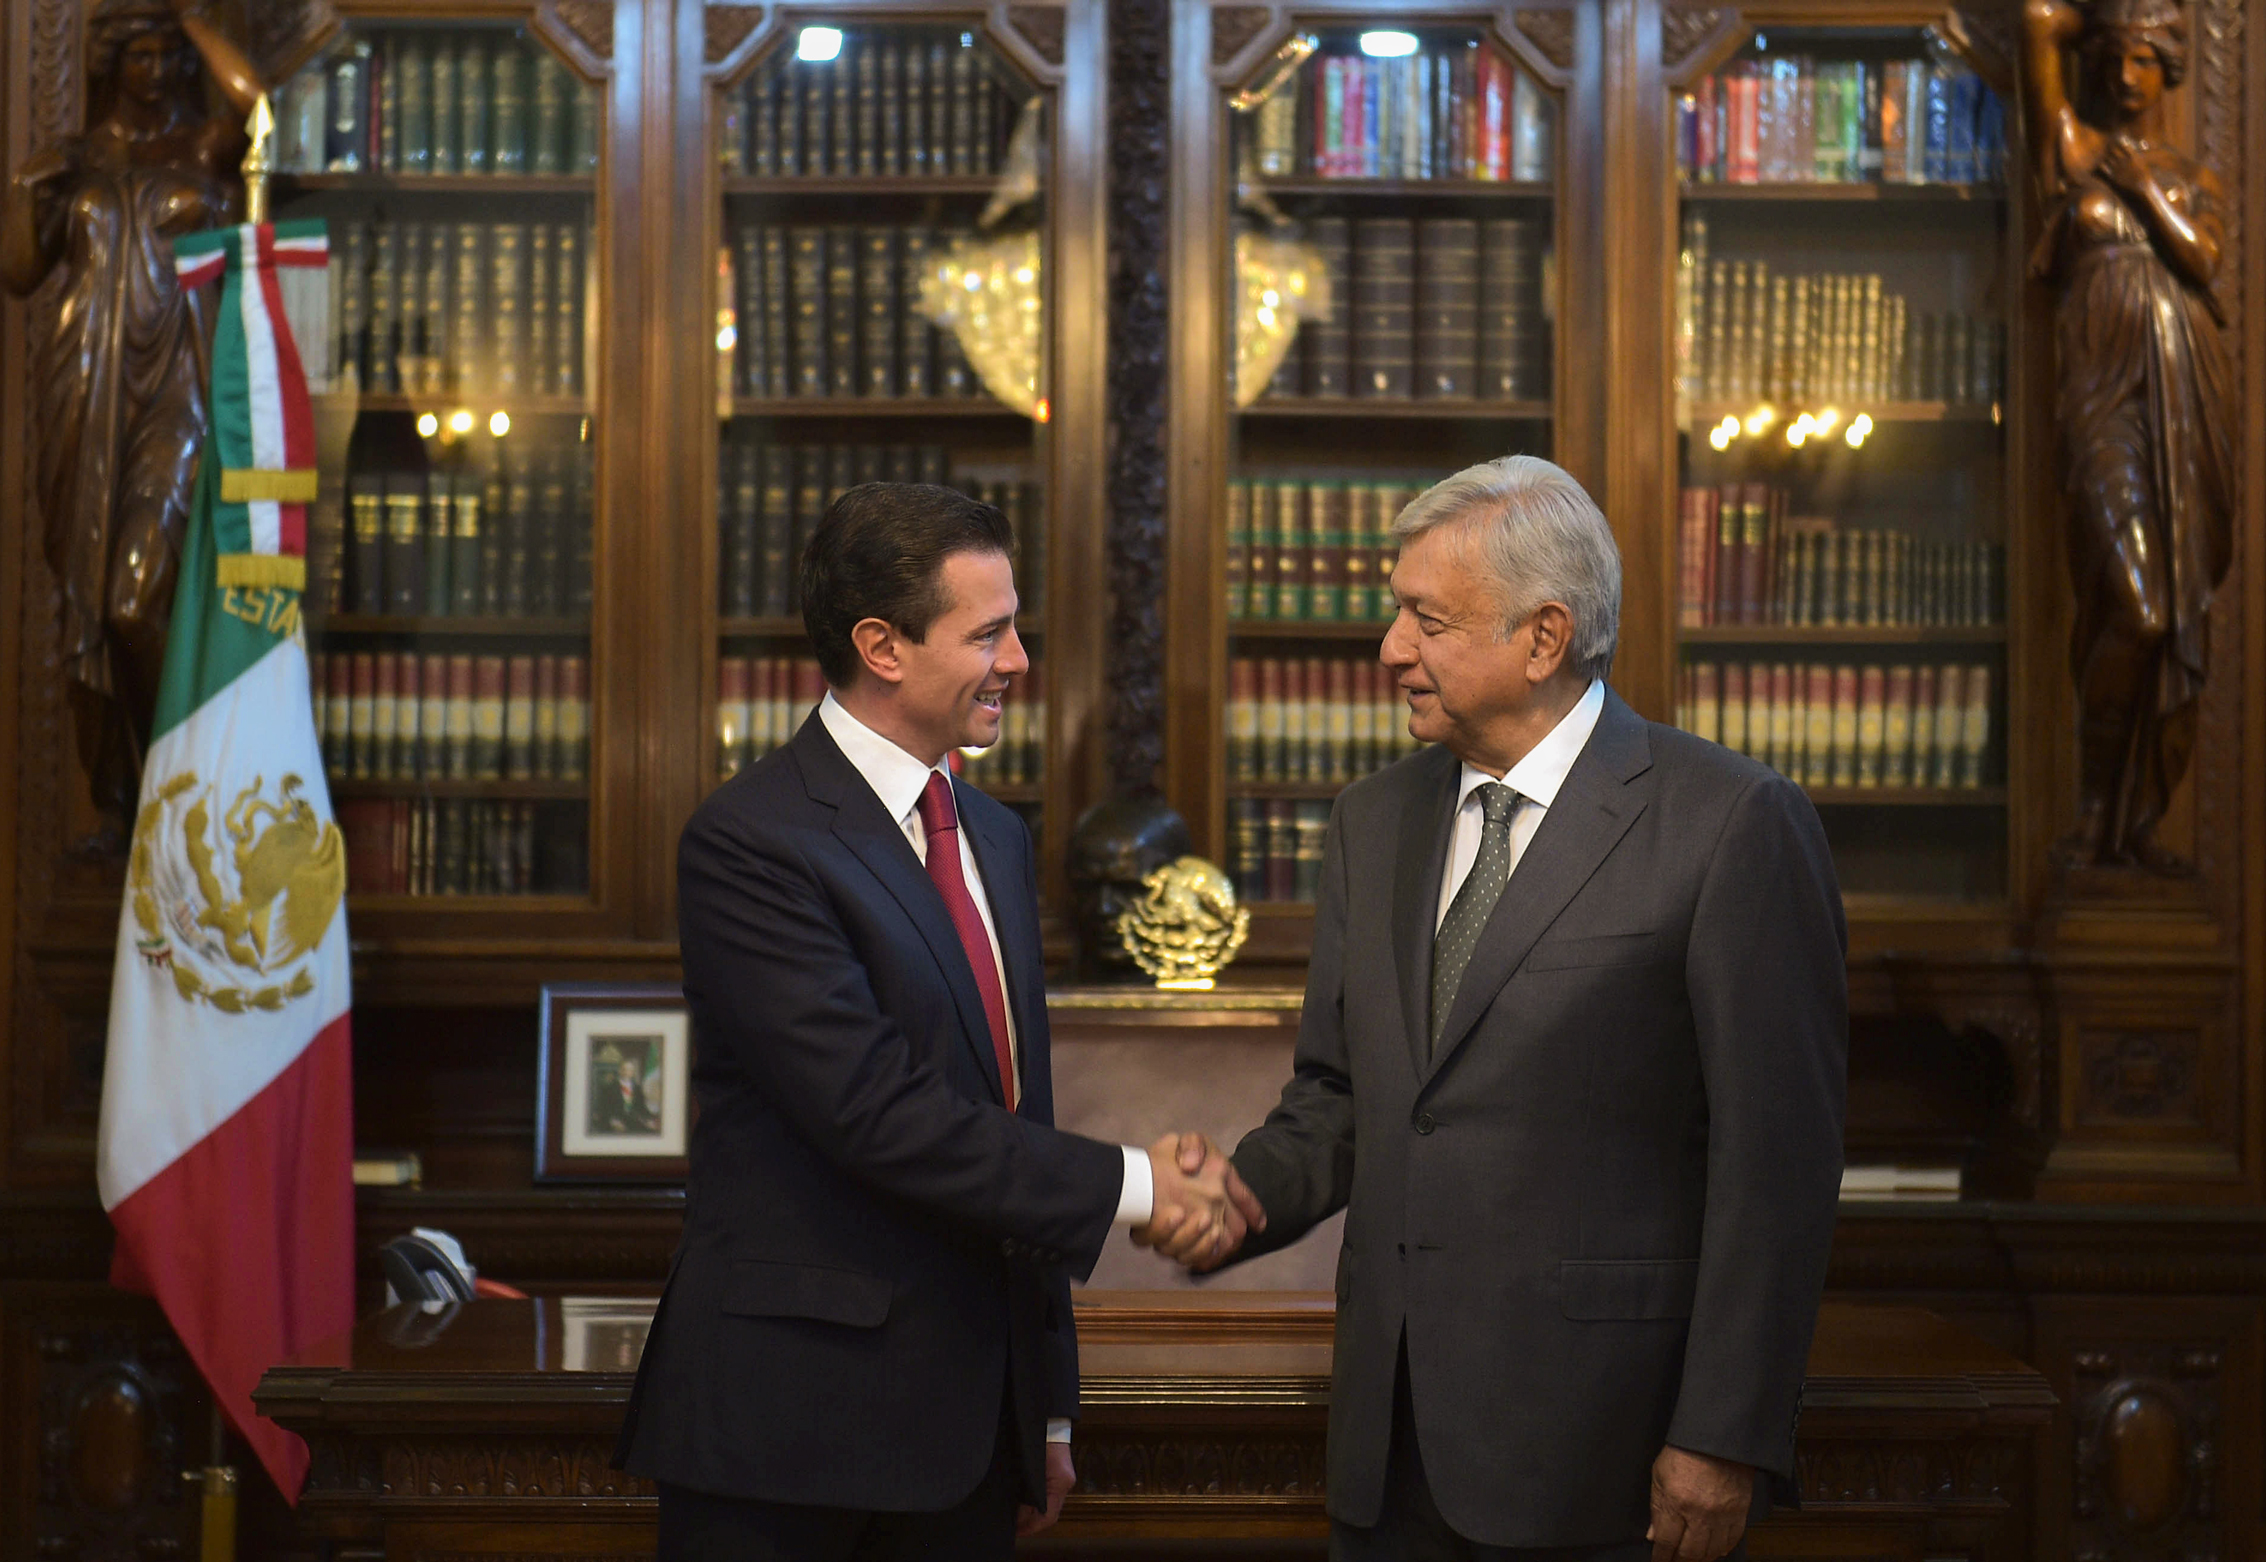 The Future of Mexico under AMLO - Foreign Policy Research Institute